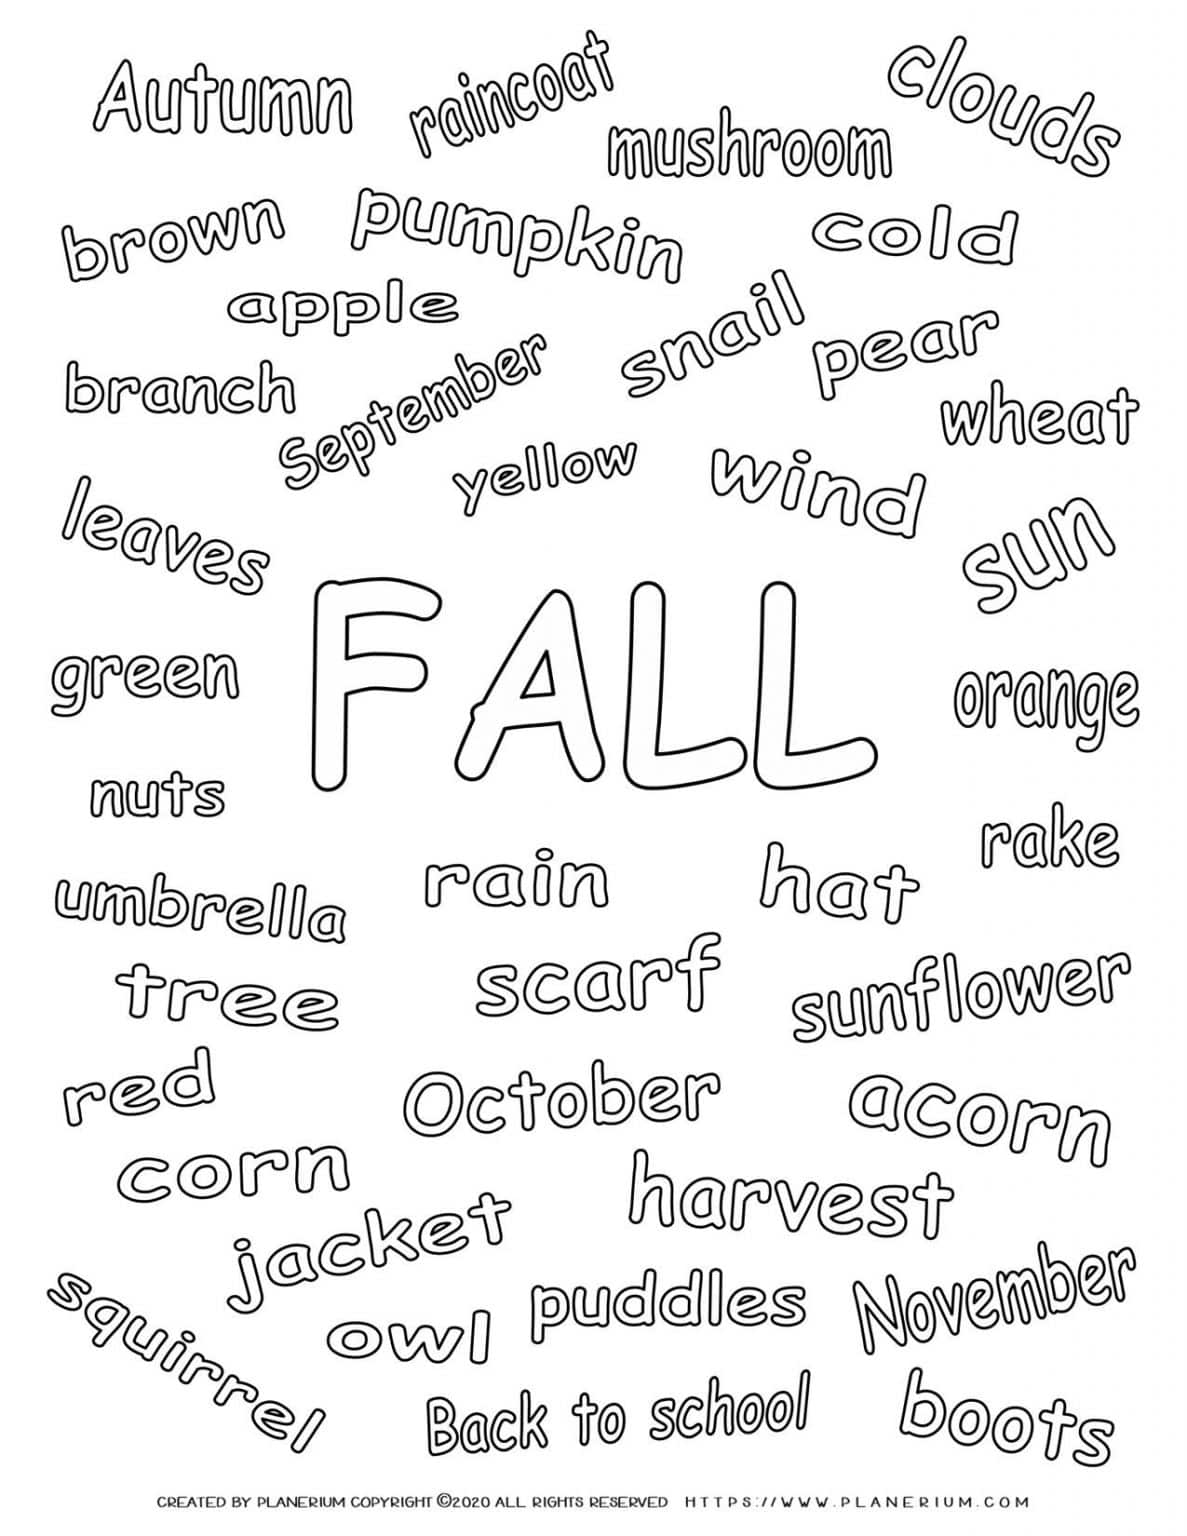 Fall Season - Coloring Page - Related Words